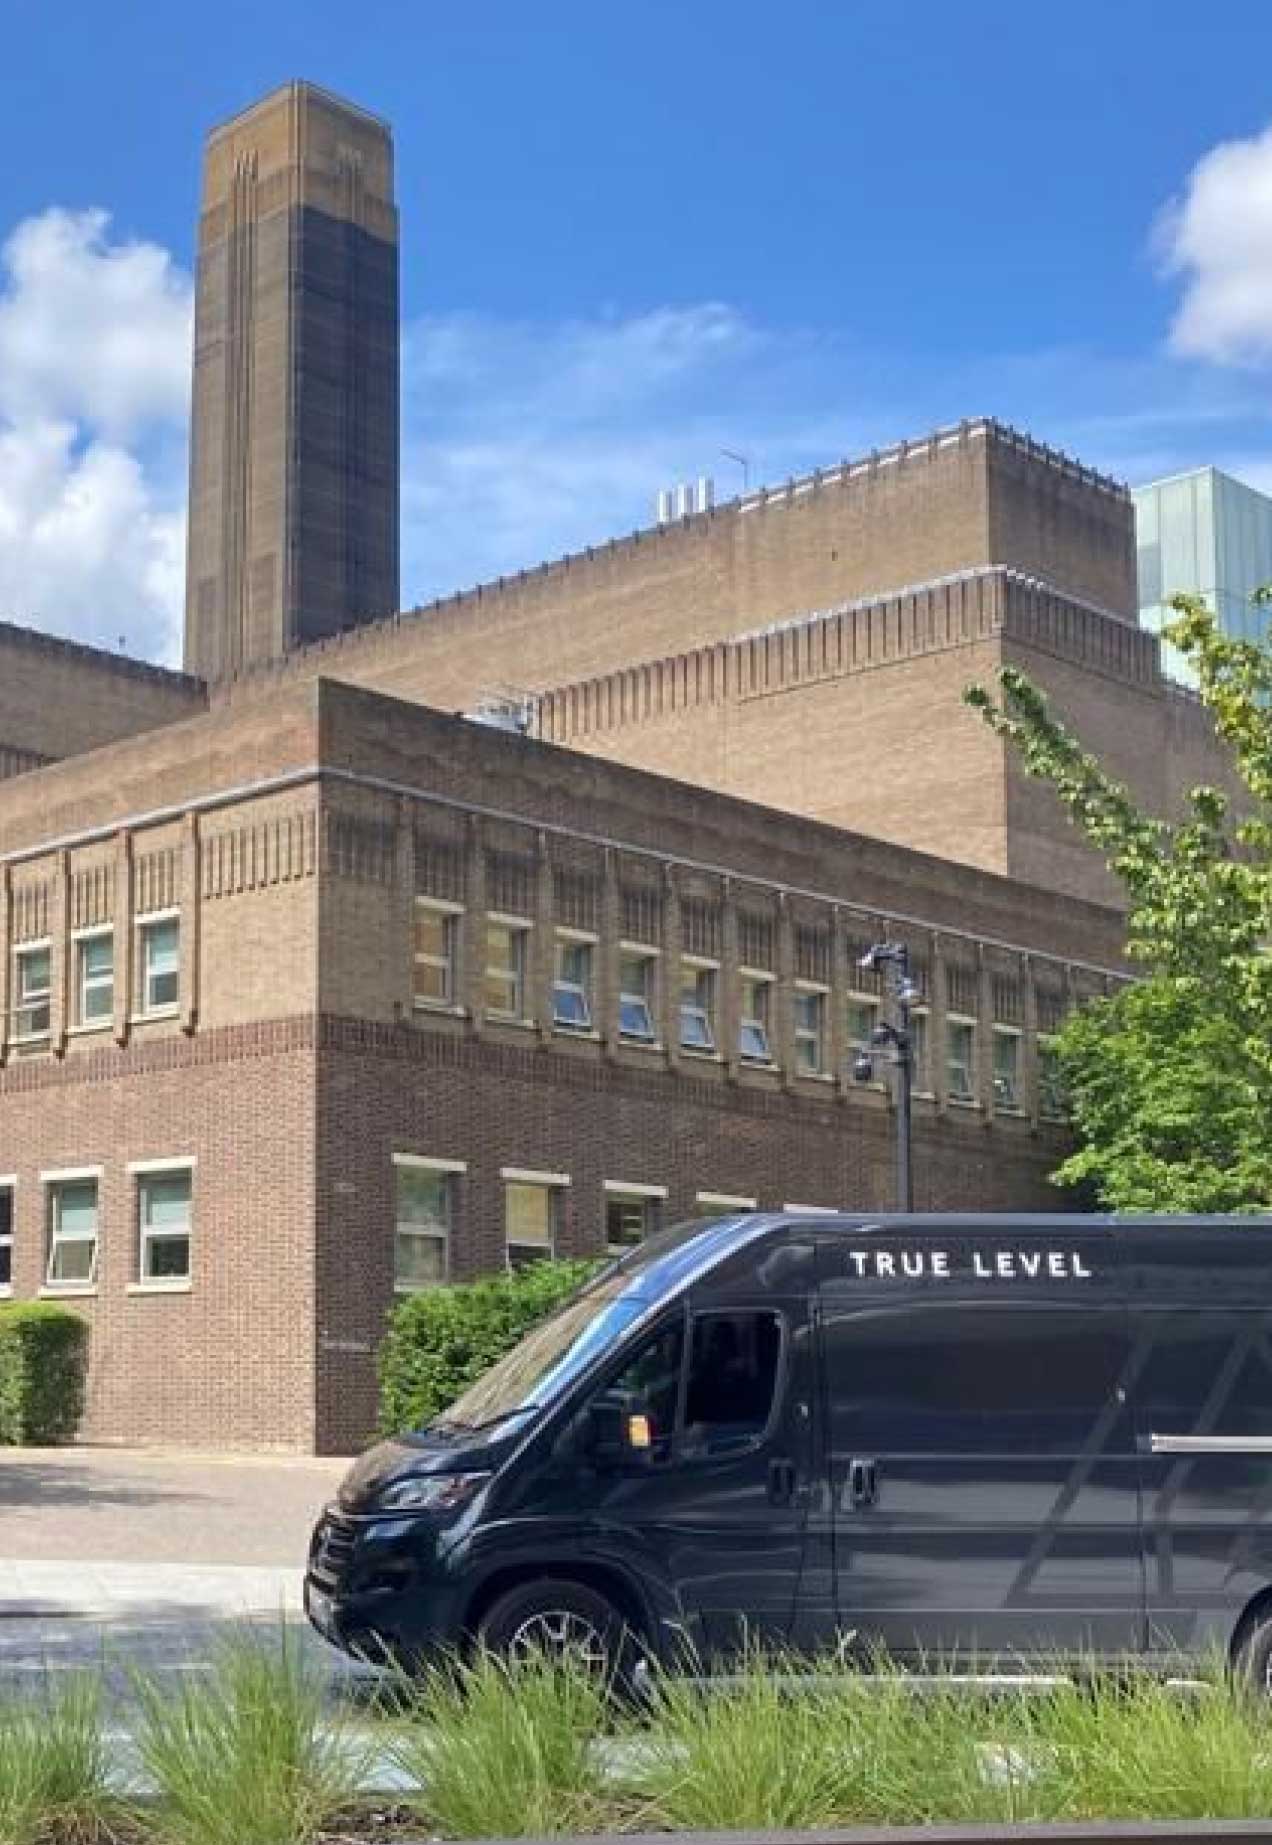 True Level Srt Handling van parked in front of the Tate Modern.